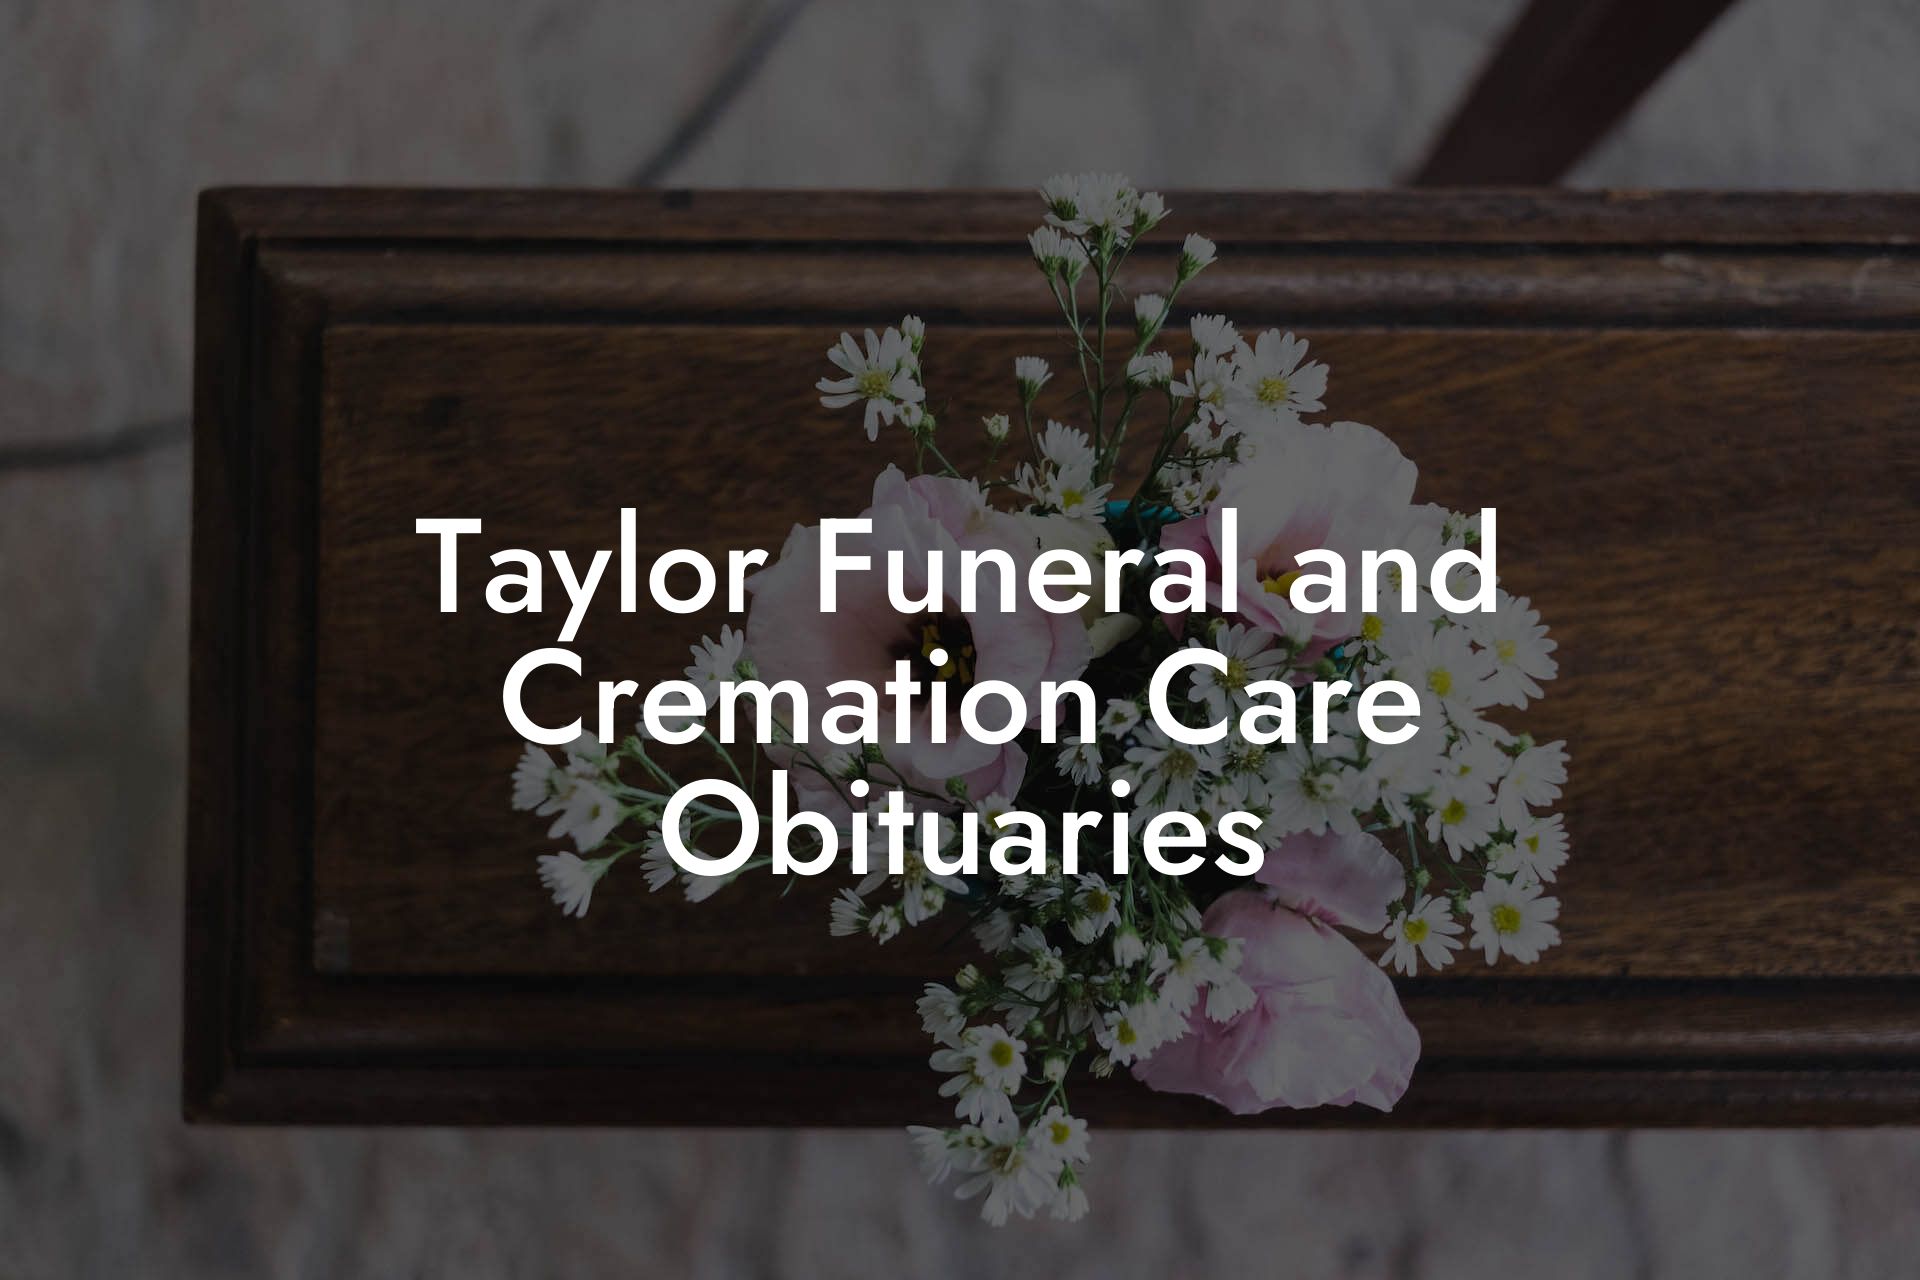 Taylor Funeral and Cremation Care Obituaries